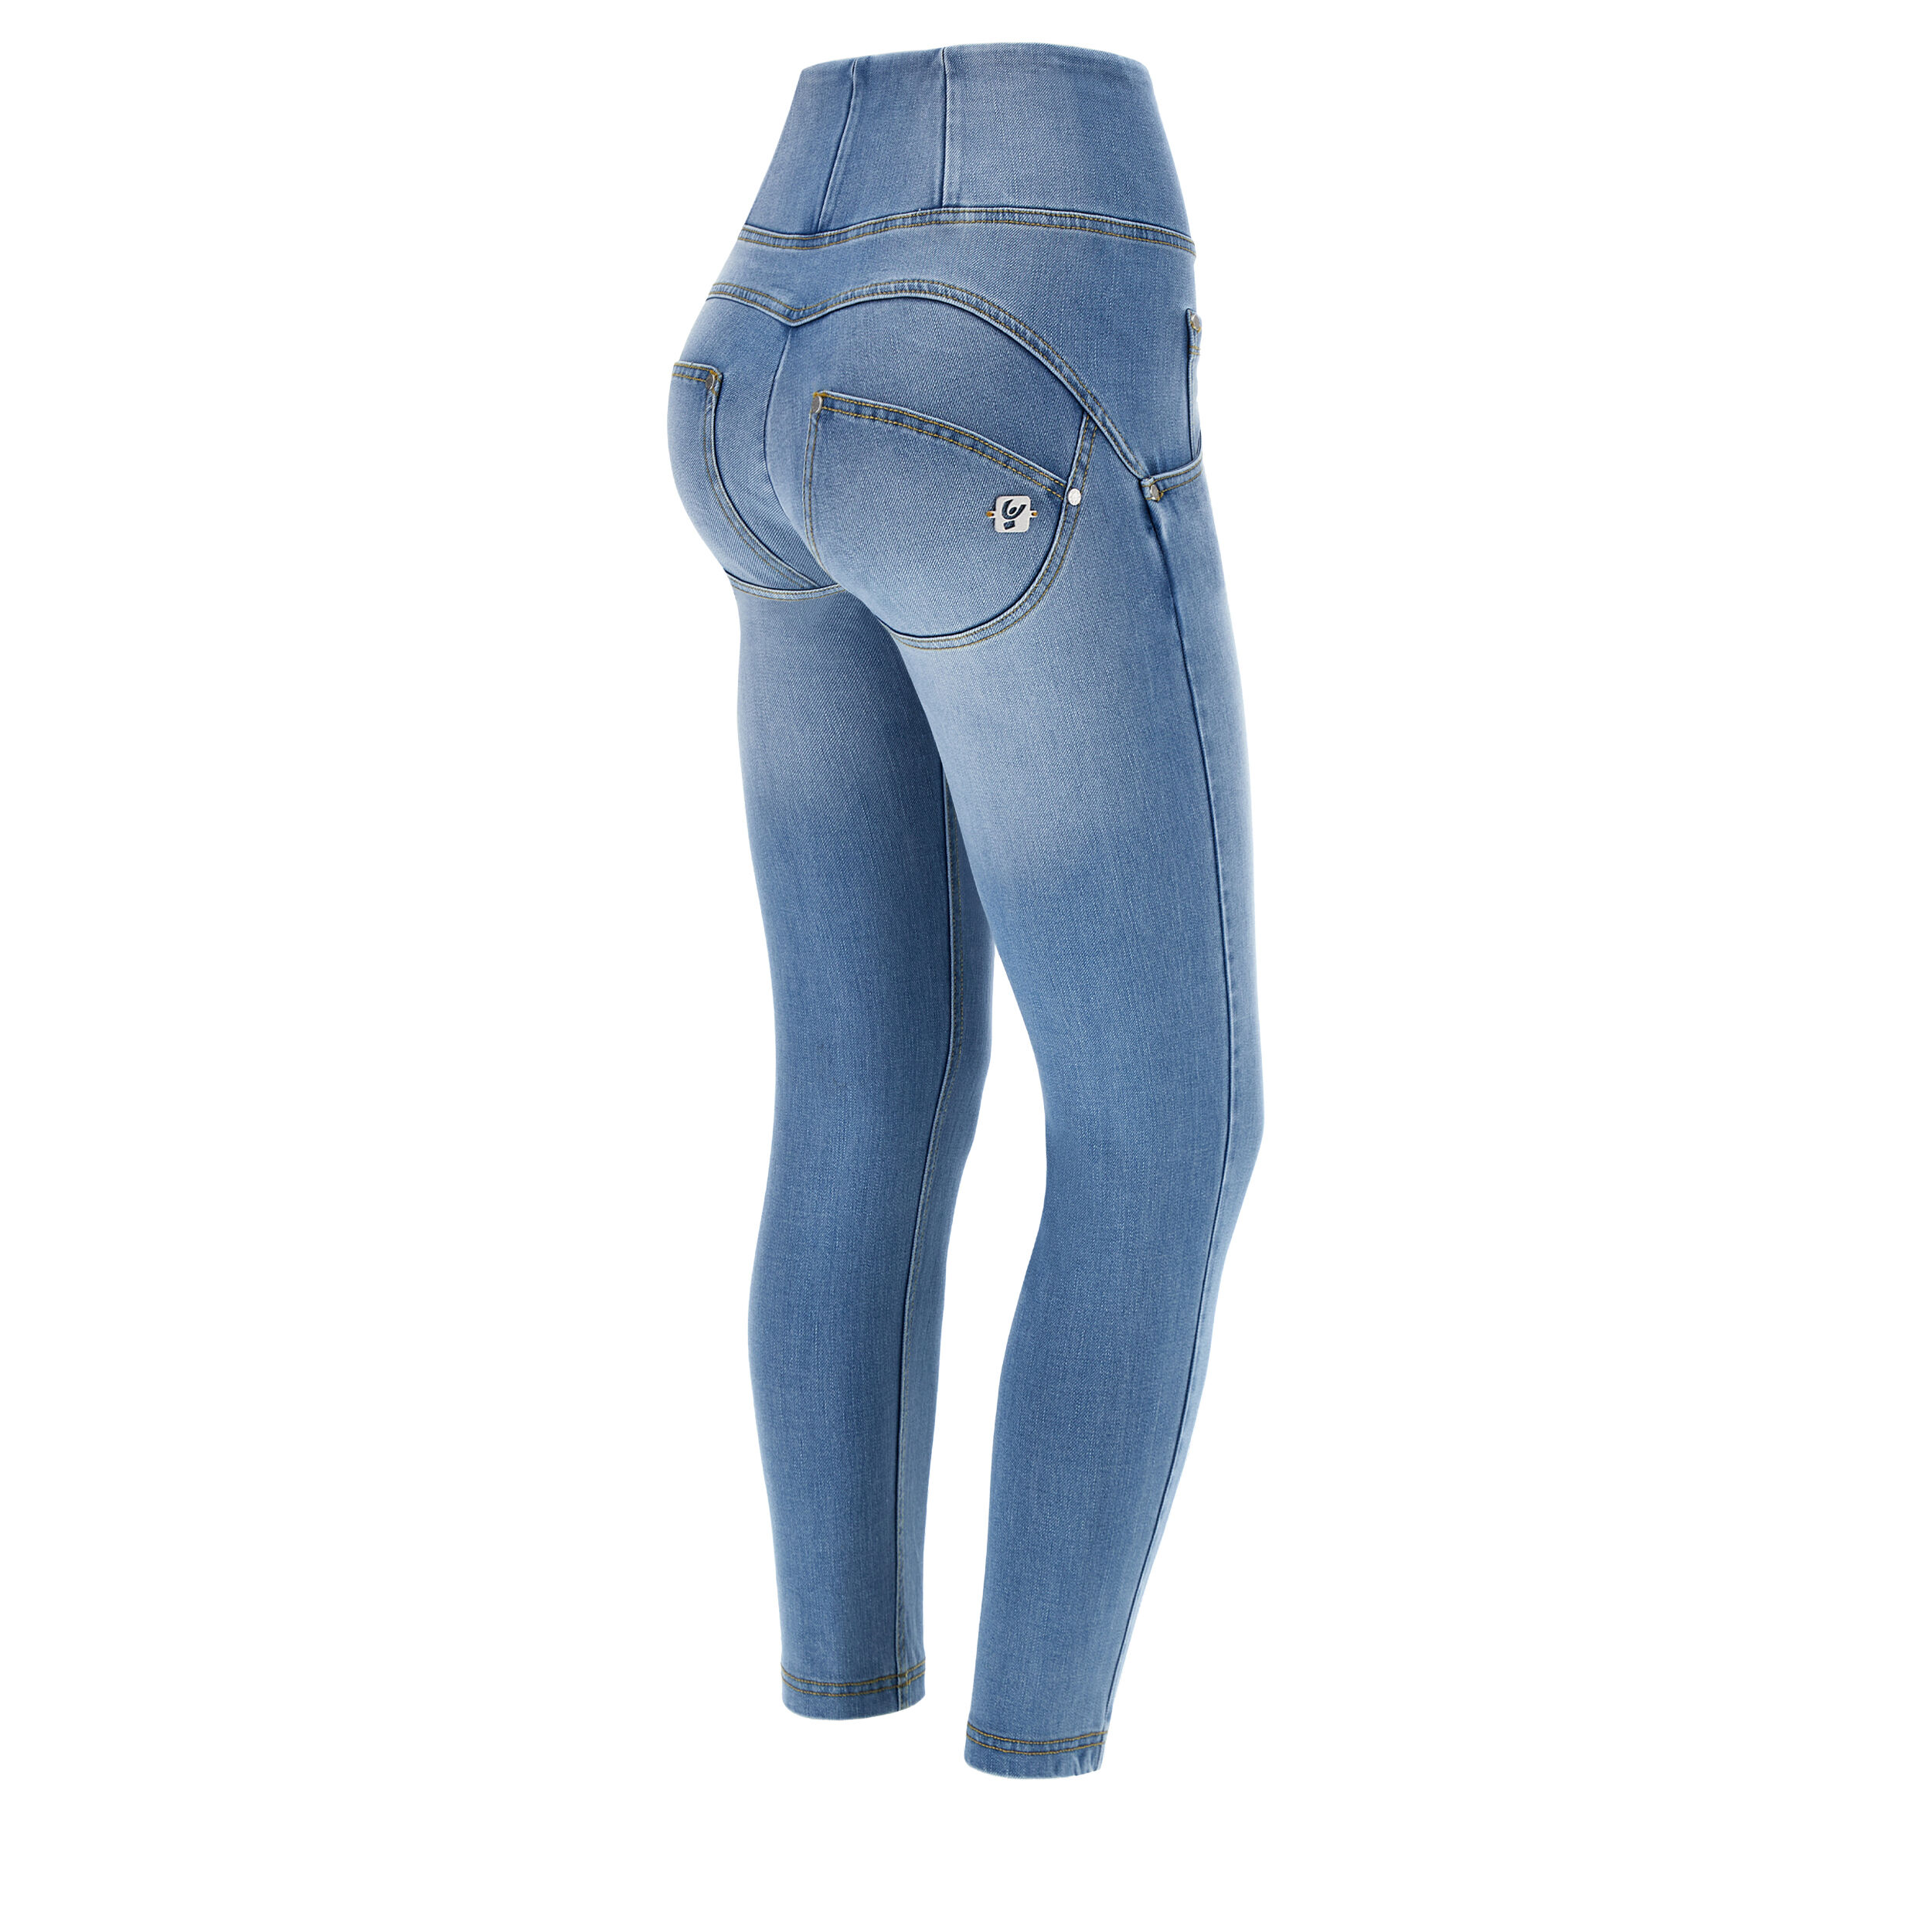 Freddy Jeans push up WR.UP® 7/8 superskinny effetto used vita alta Jeans Chiaro-Cuciture Gialle Donna Extra Small